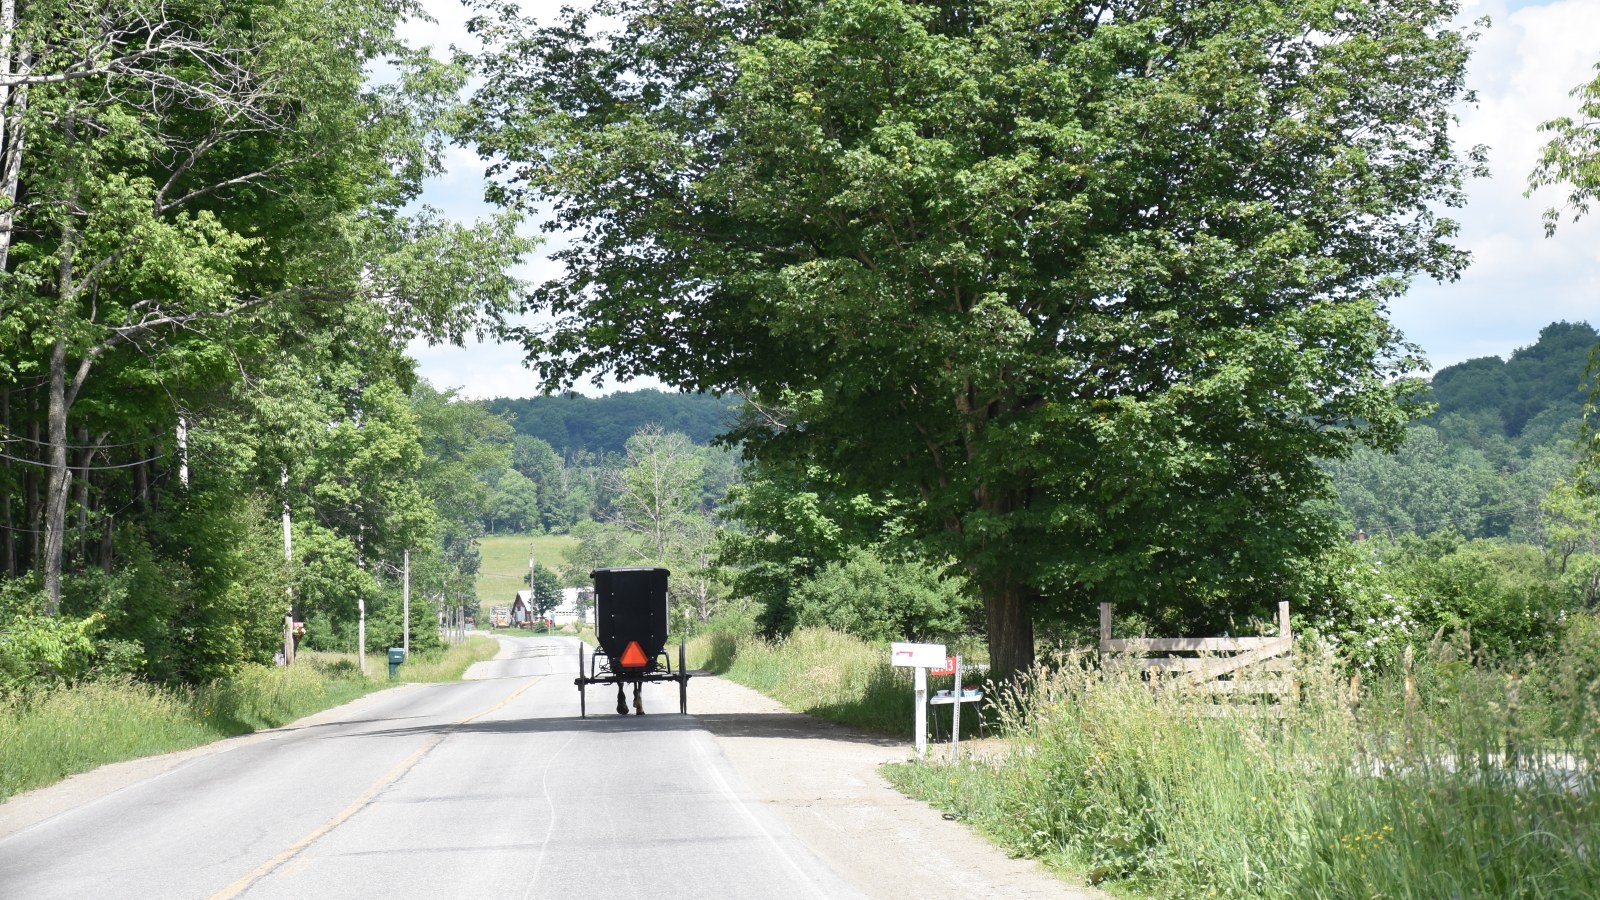 Amish Buggy on the road on a sunny, summer day